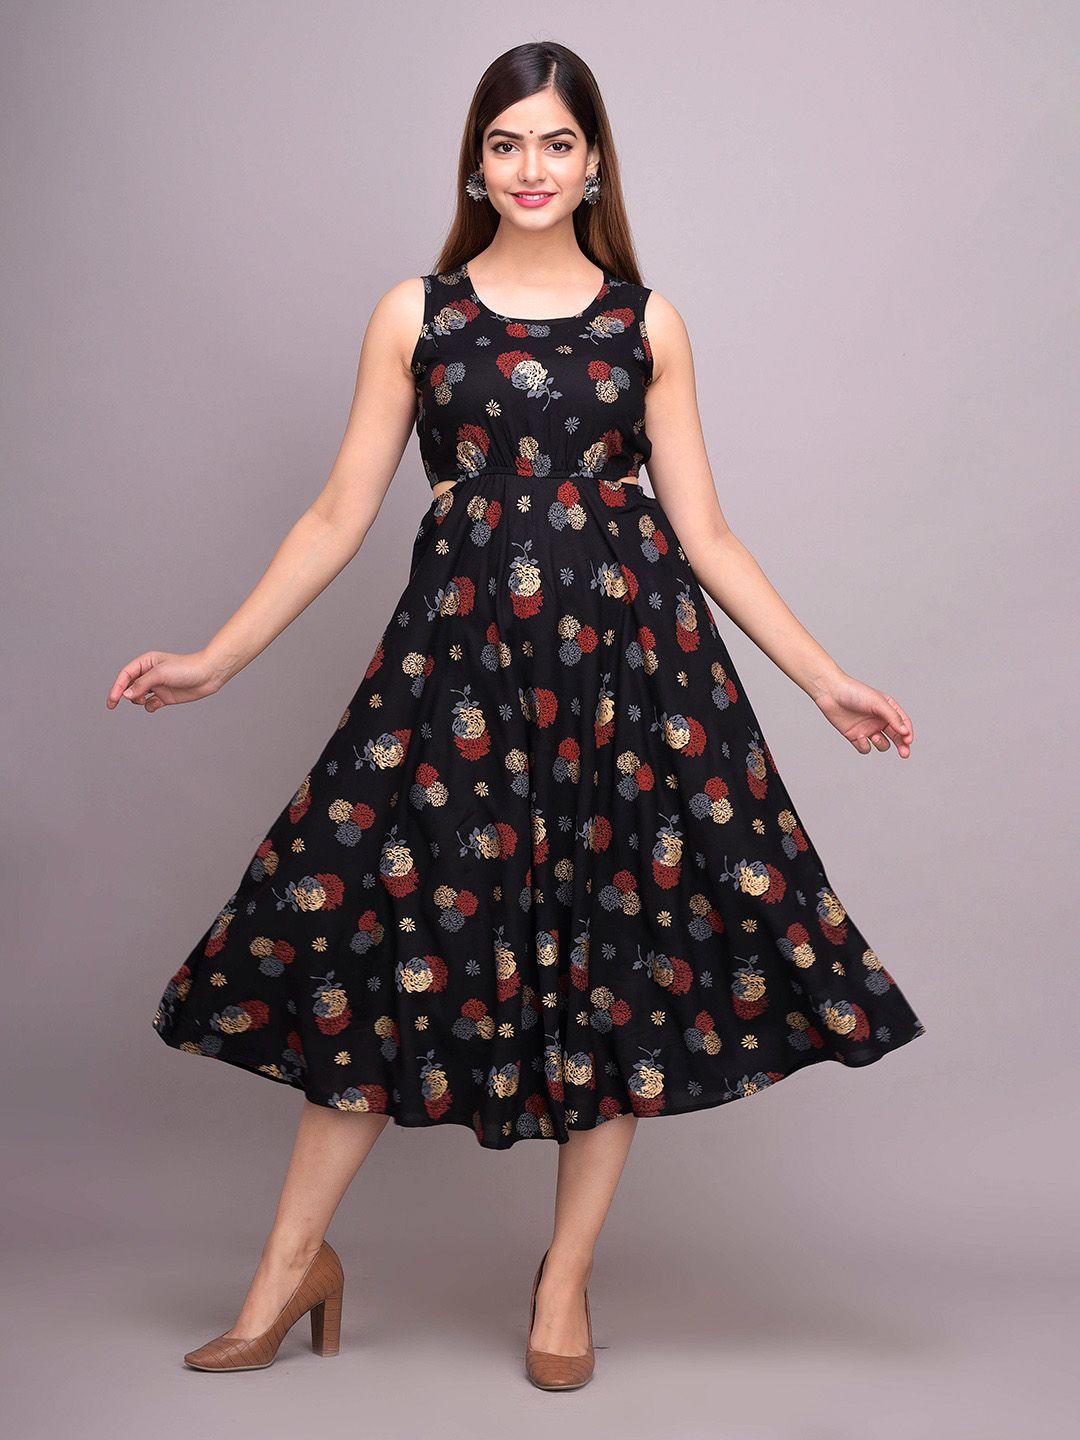 unibliss black & french middle red purple floral print a-line midi dress